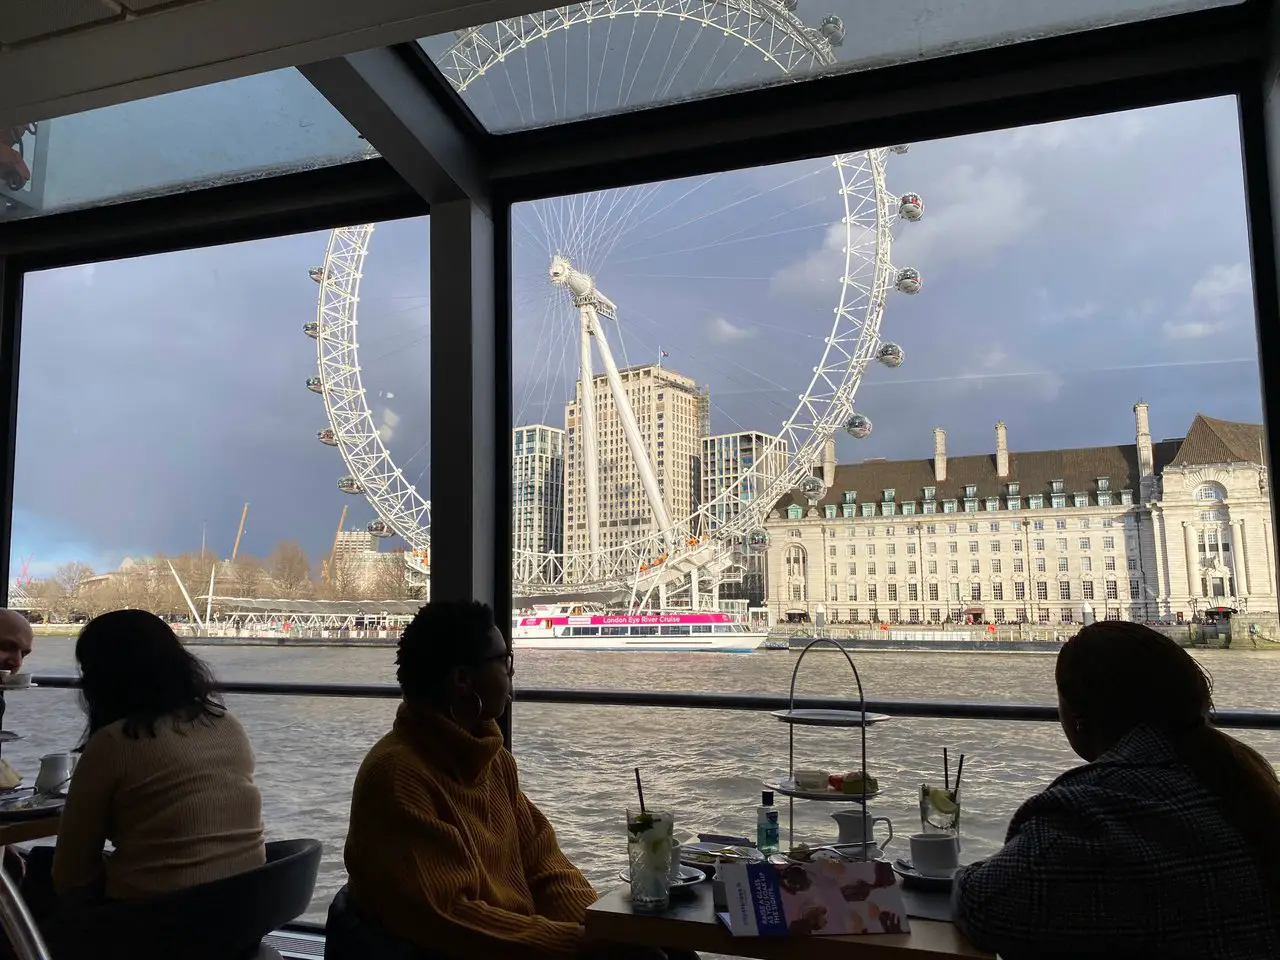 River Thames Afternoon Tea Boat Cruise in London. Afternoon tea trays are stacked on tables and you can see the London Eye from the boat's window